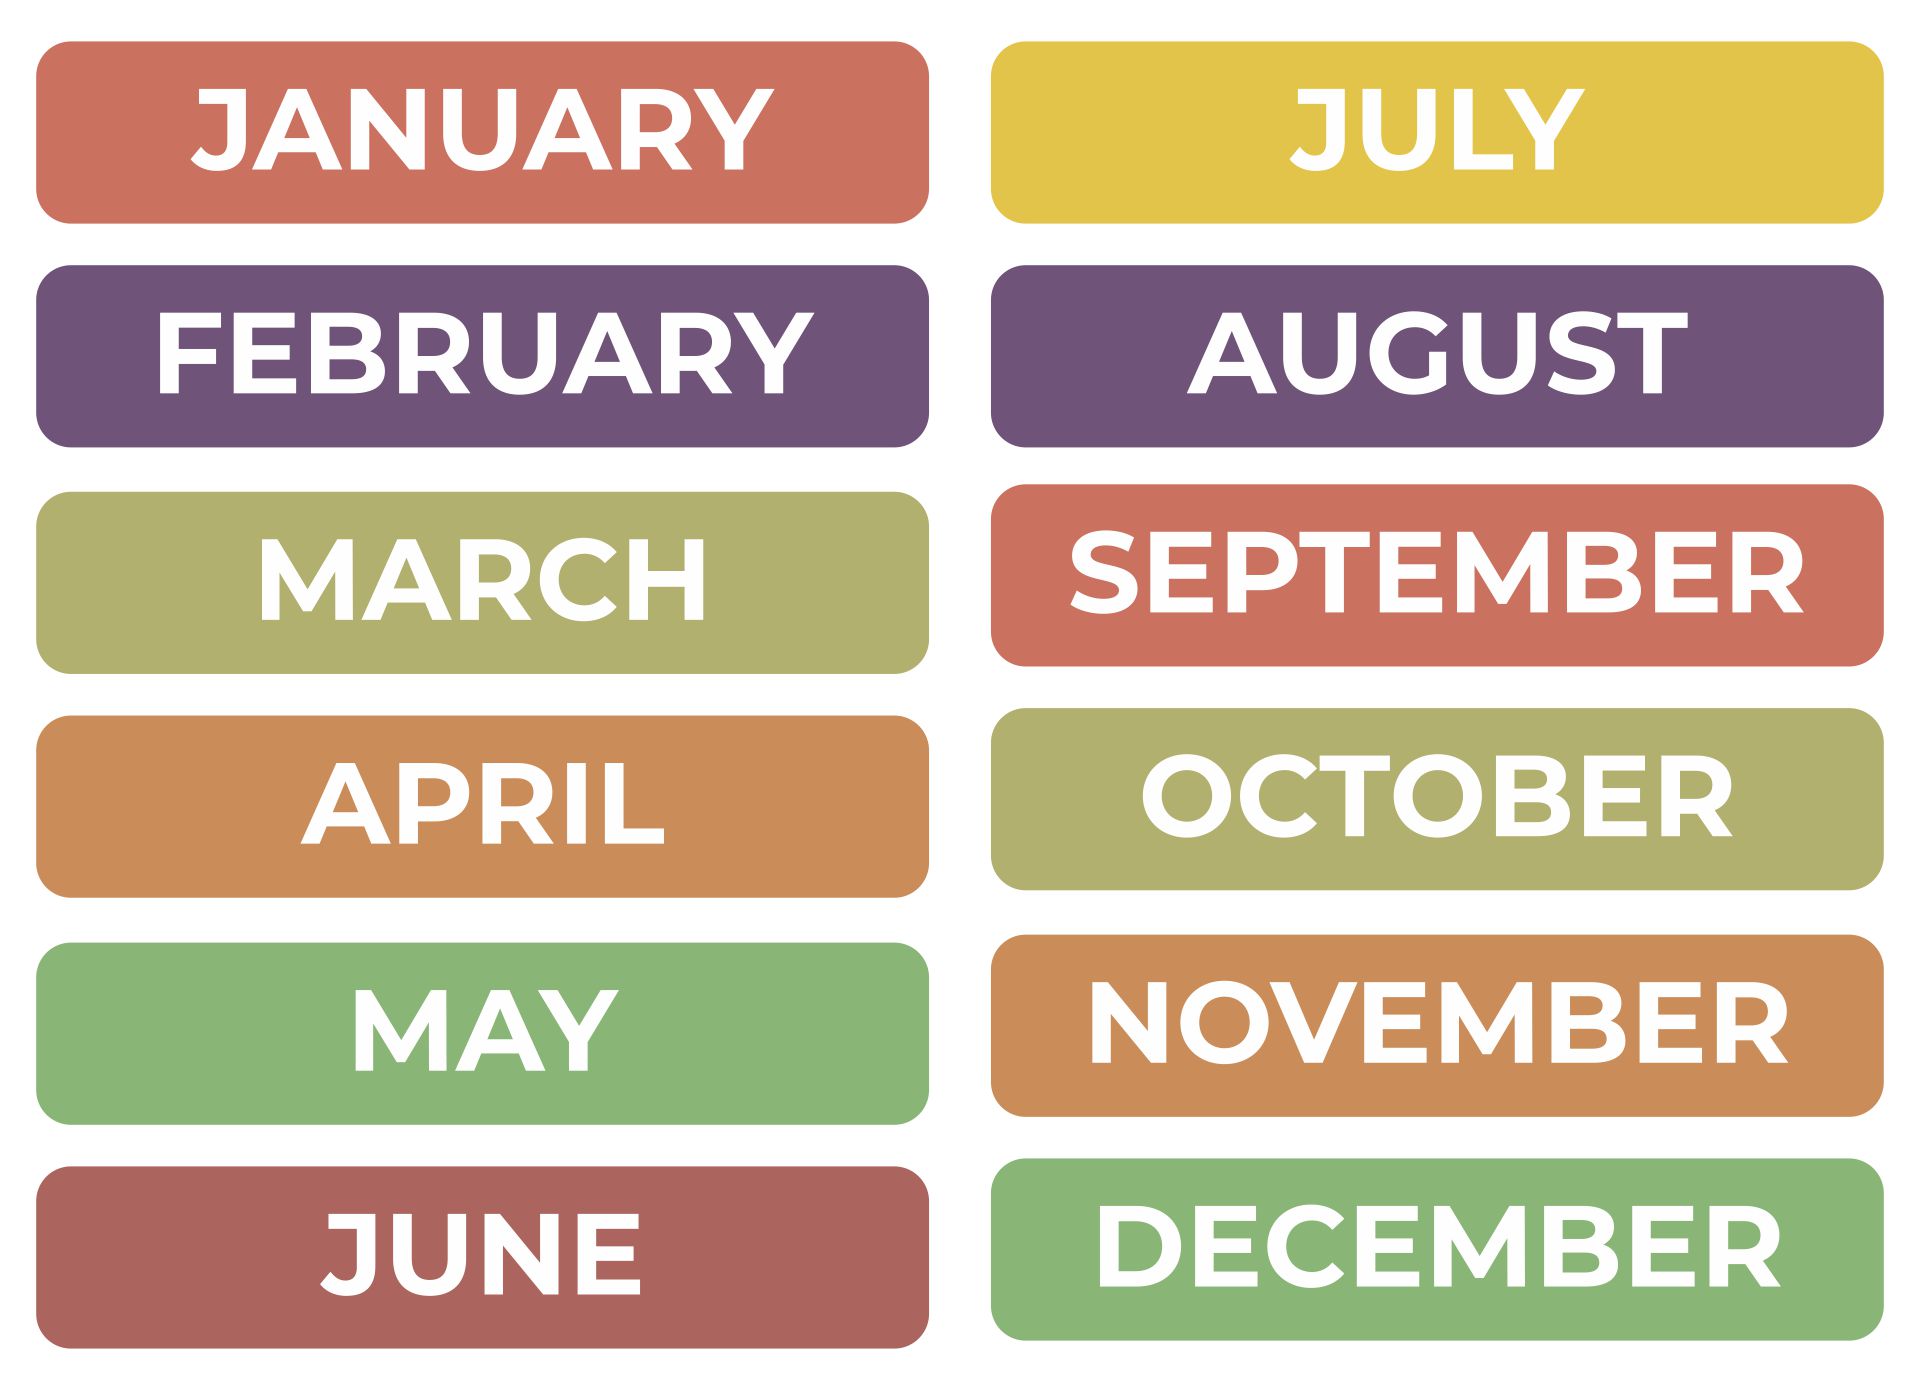 All the Months of Year